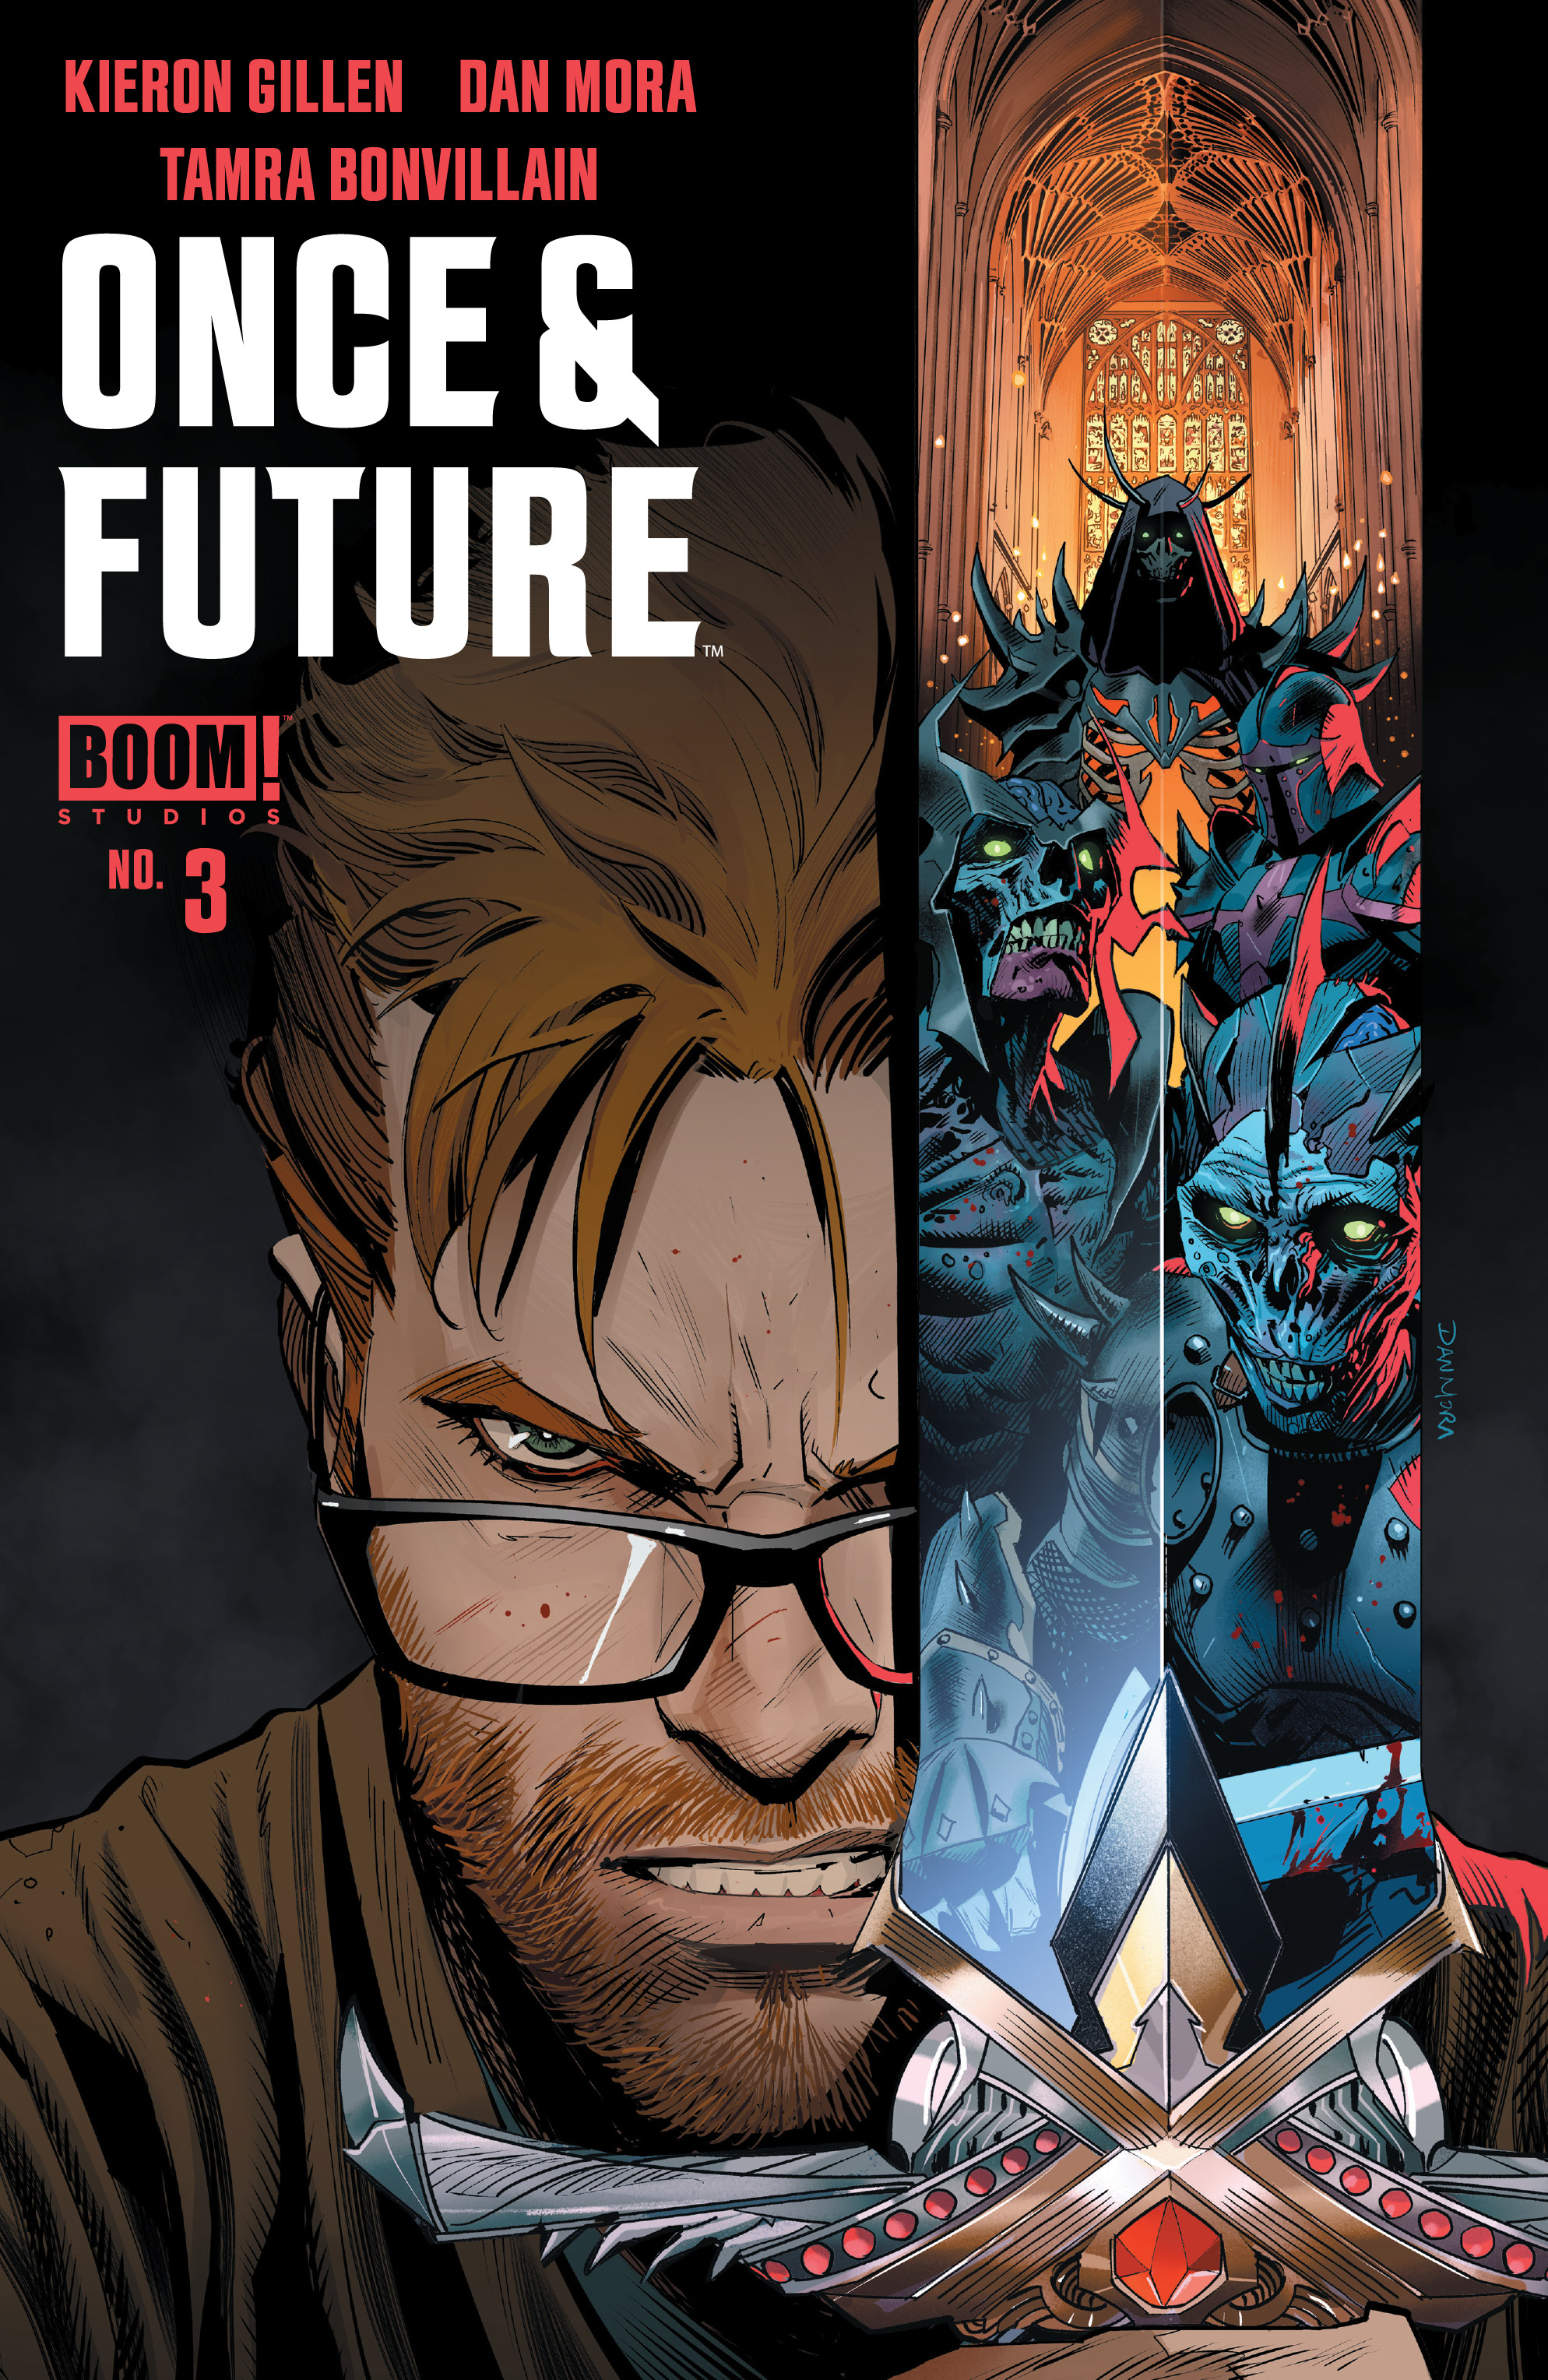 Read online Once & Future comic -  Issue #3 - 1